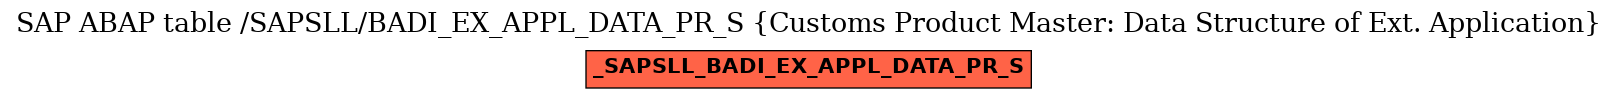 E-R Diagram for table /SAPSLL/BADI_EX_APPL_DATA_PR_S (Customs Product Master: Data Structure of Ext. Application)